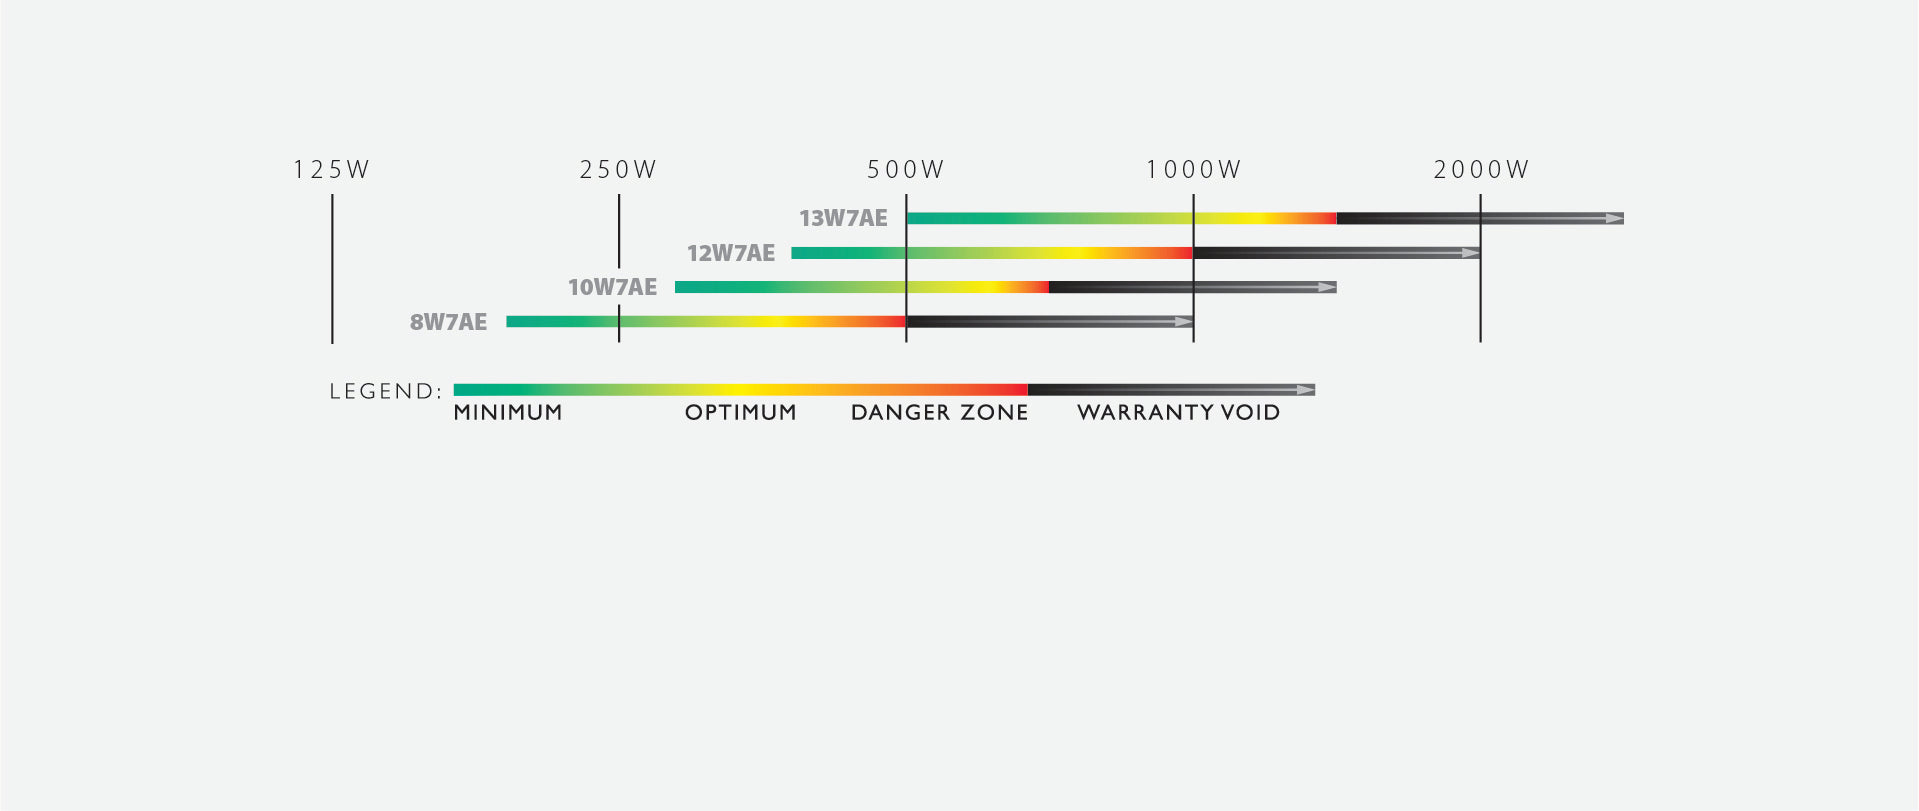 A chart showing the wattage power of a 8, 10 and 12 inch W7AE subwoofer unit.